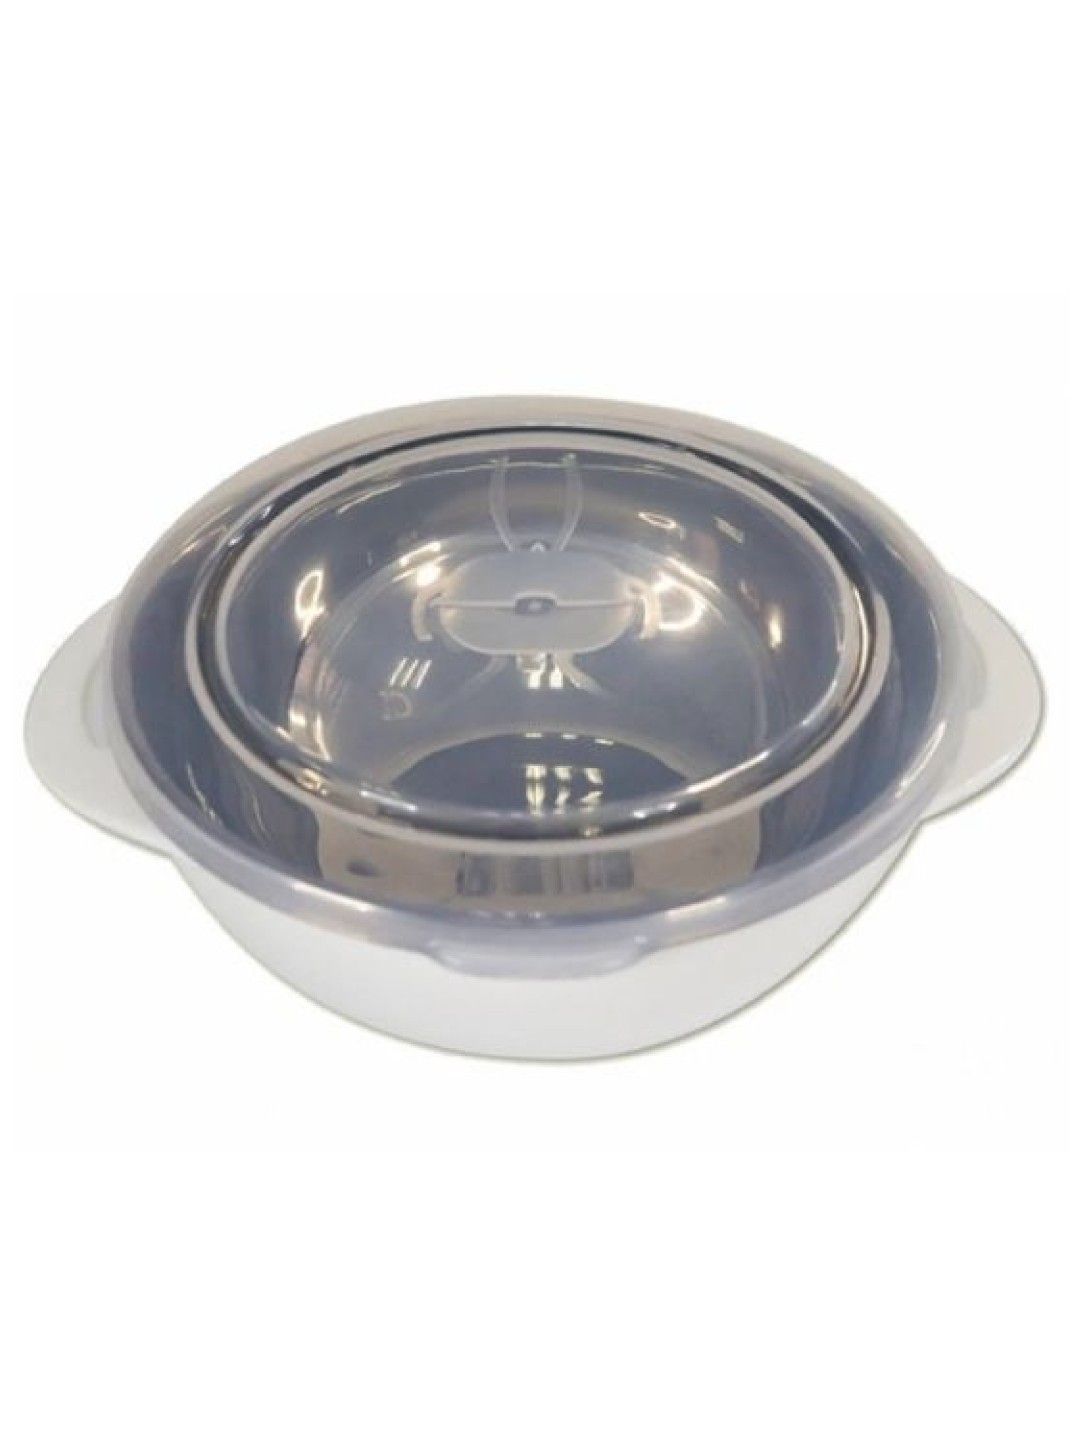 Berz Small Bowl & Cover